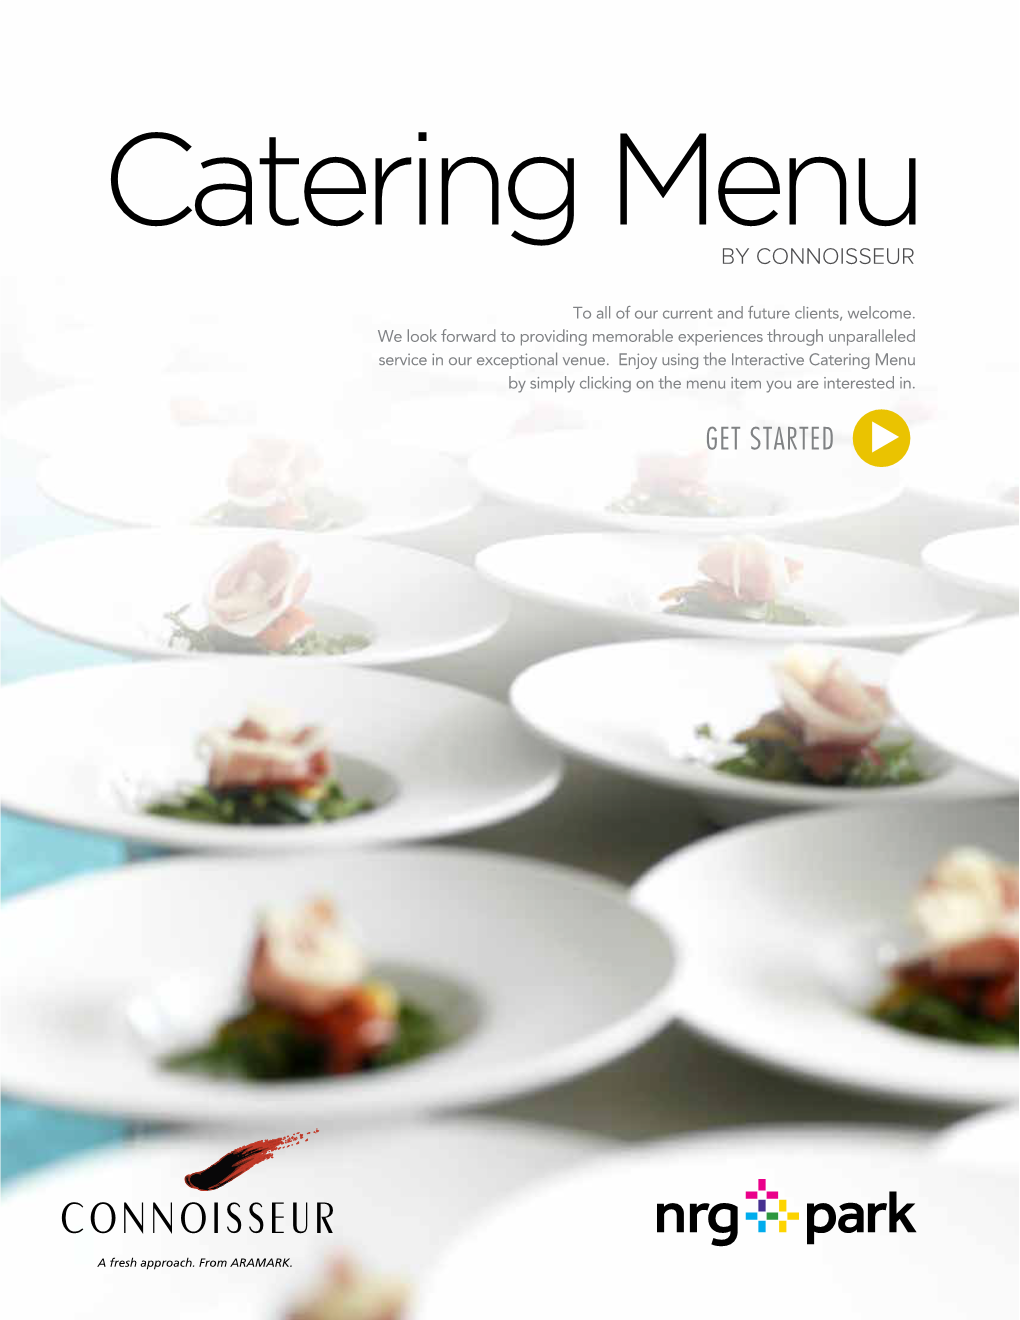 Catering Menu by CONNOISSEUR